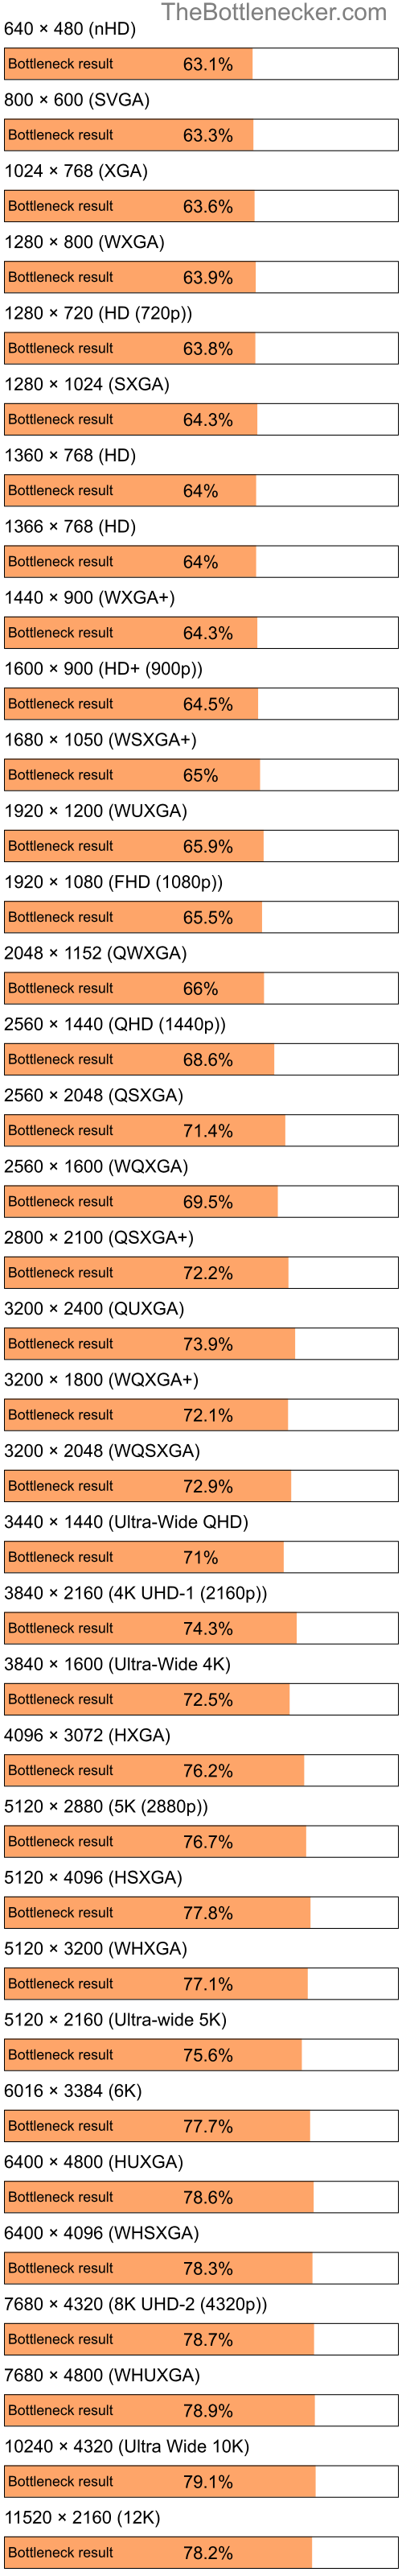 Bottleneck results by resolution for Intel Pentium 4 and AMD Radeon HD 3200 in7 Days to Die